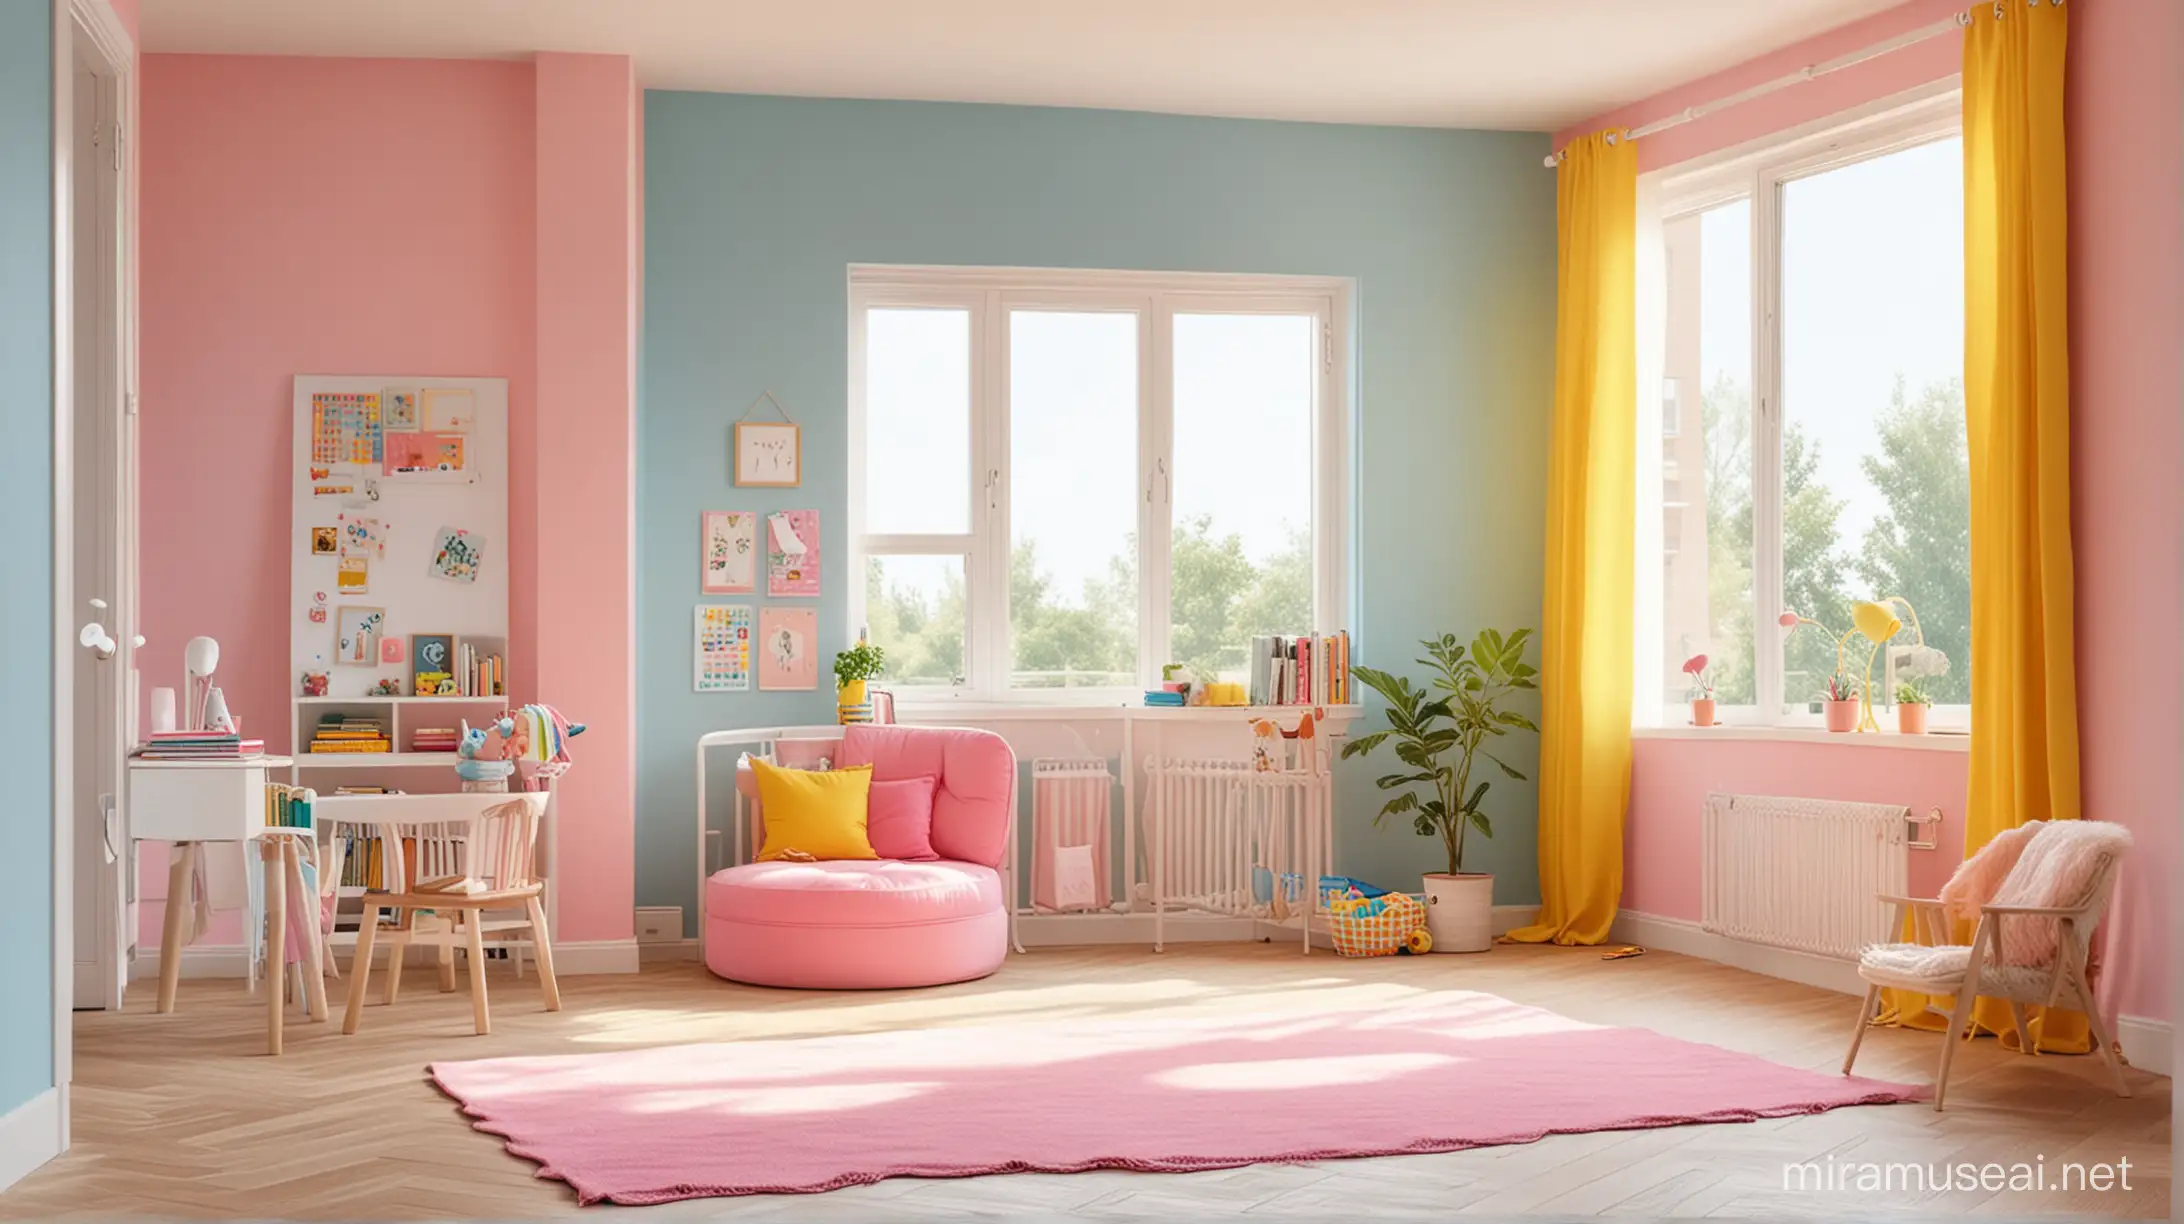 A kids room with color pink , yellow and blue , have a window the sunshine light comes throw it, and there is a big board in the floor with colors. make it without any person or kid